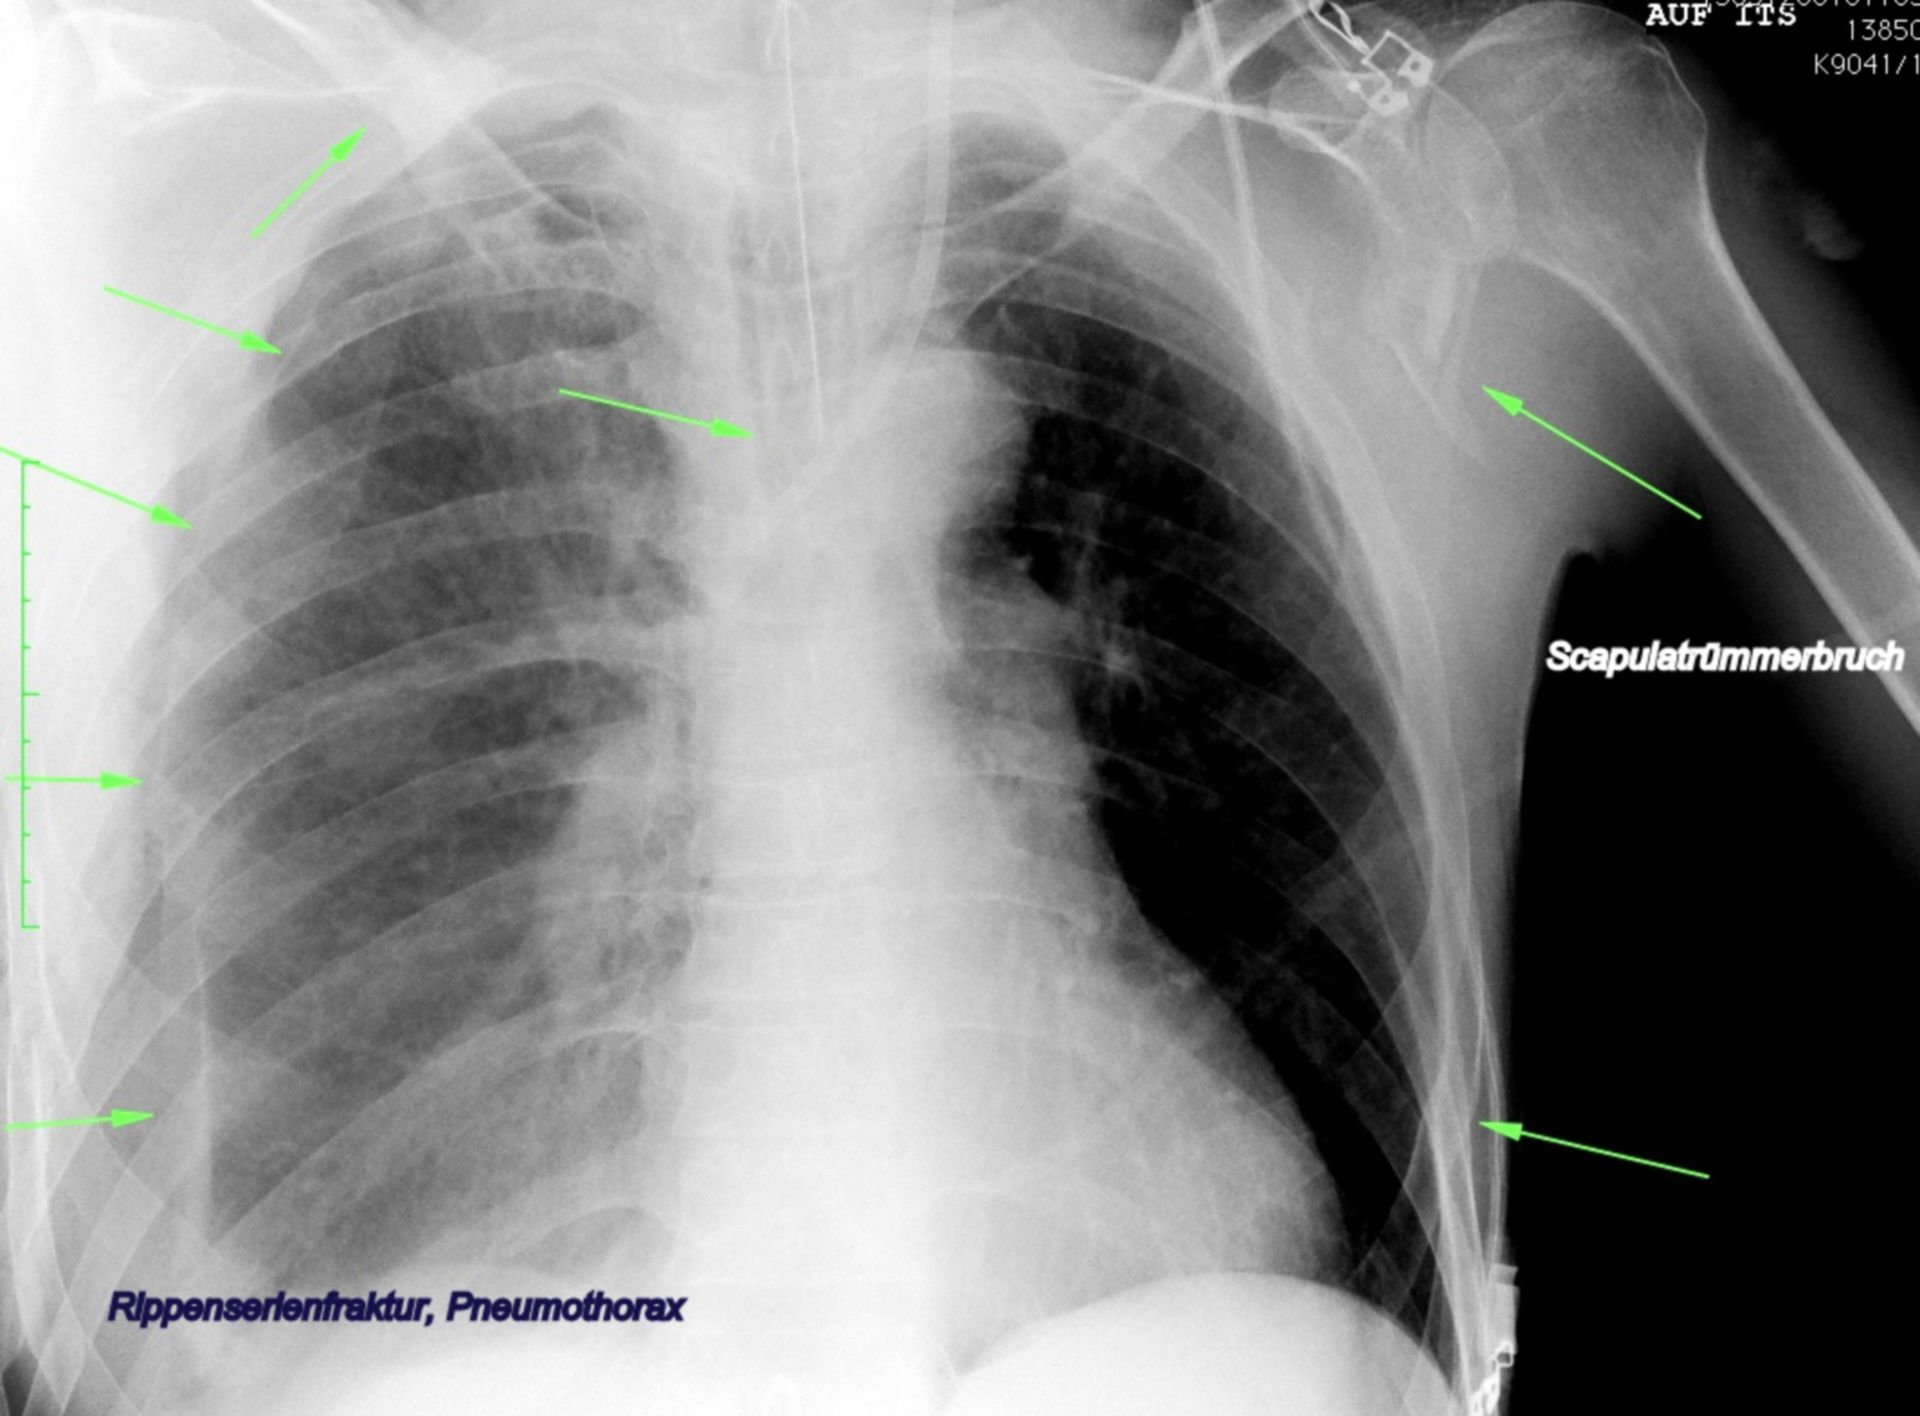 Serial rib fracture - Pneumothorax - Comminuted fracture of scapula left